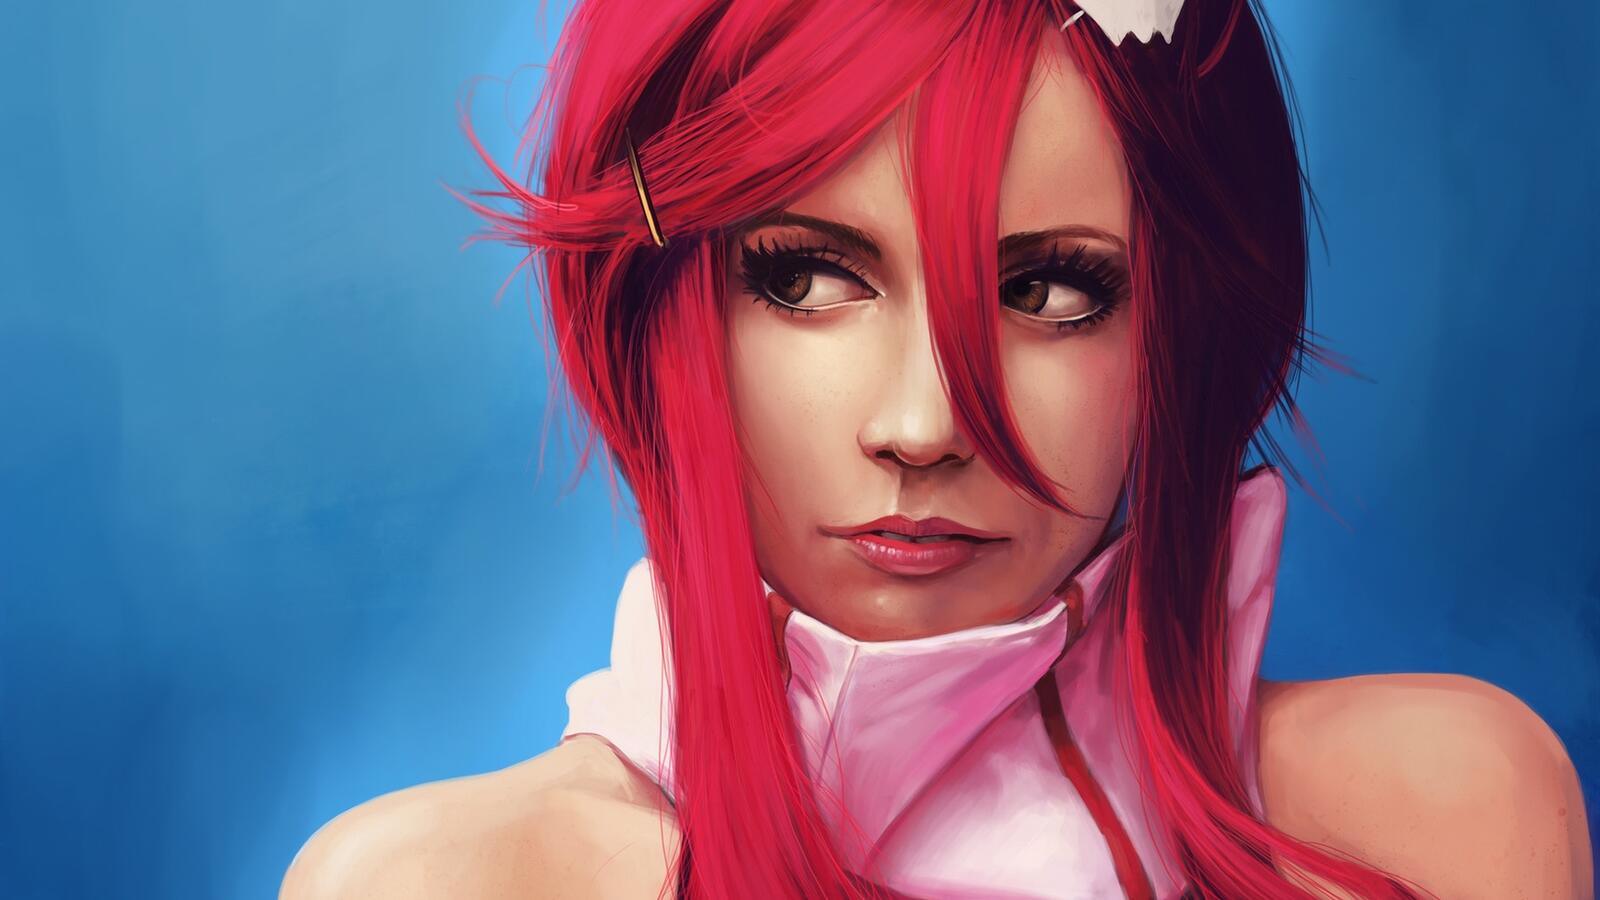 Wallpapers girl red hair costume on the desktop